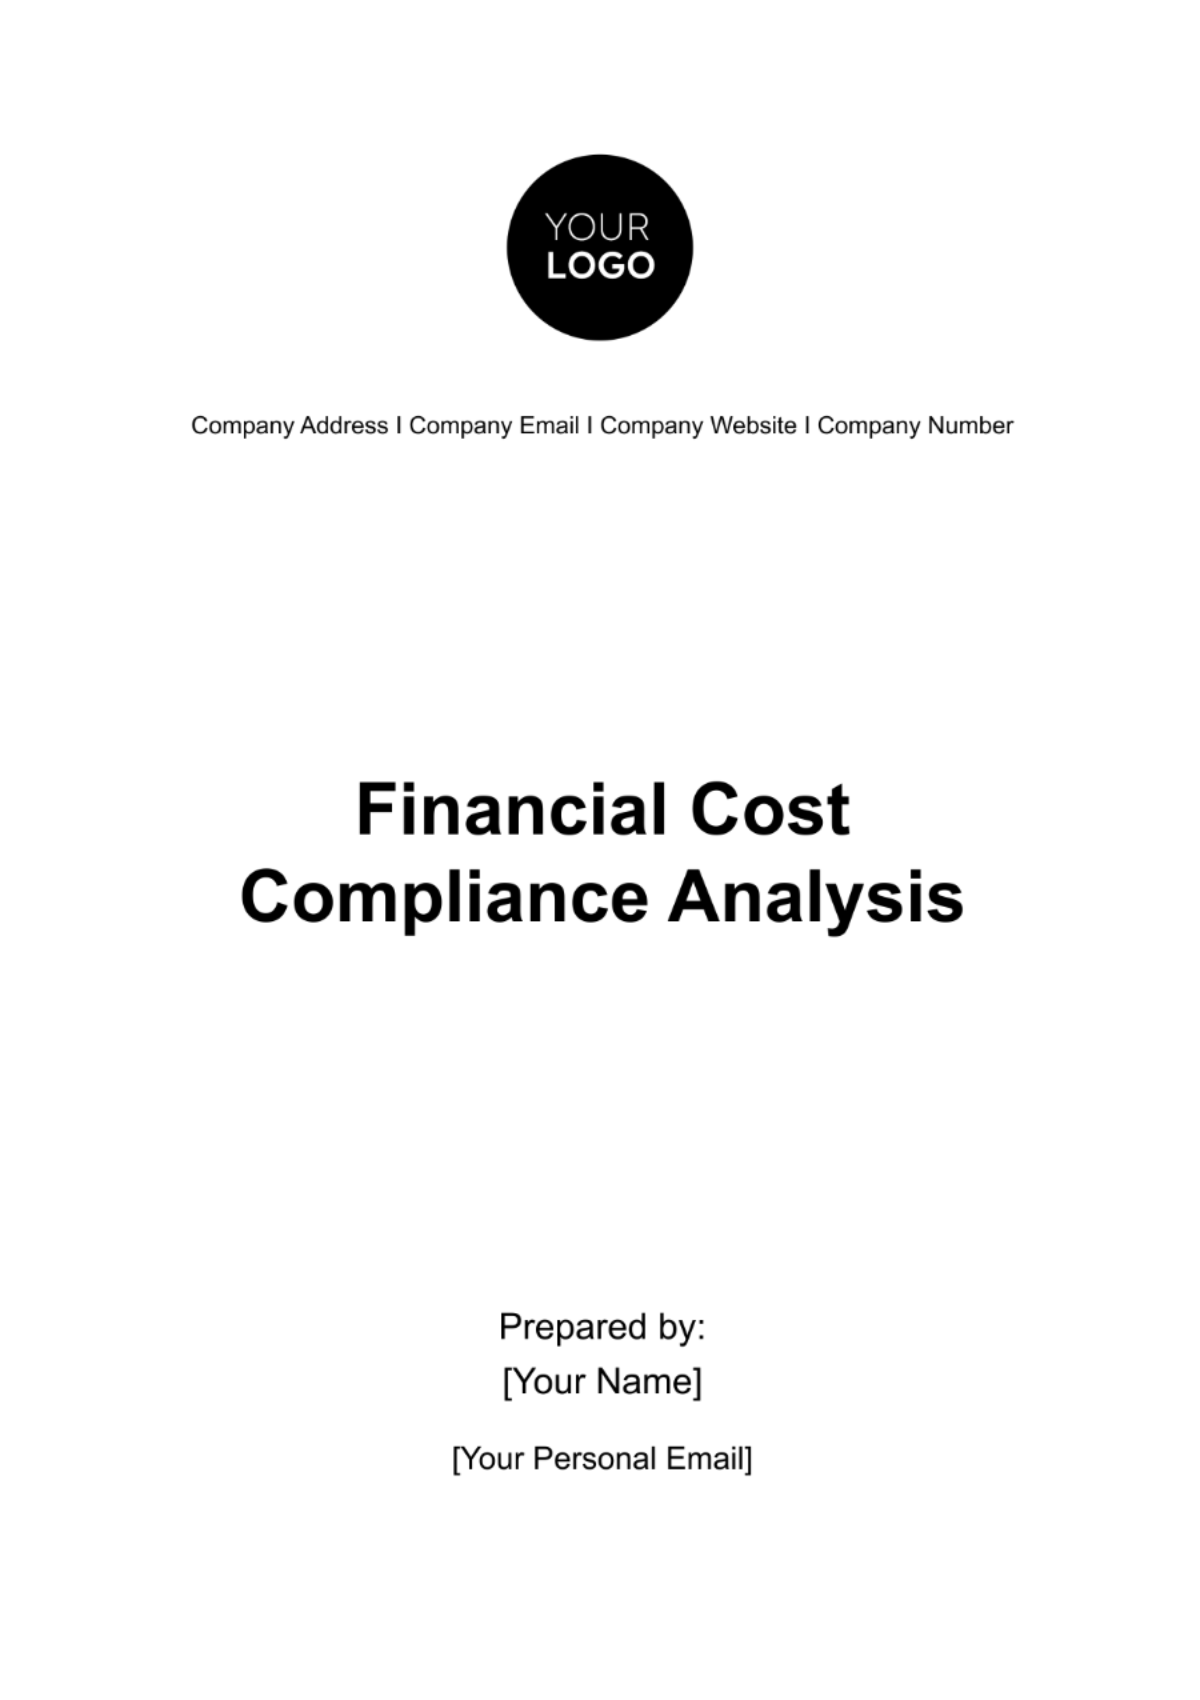 Financial Cost Compliance Analysis Template